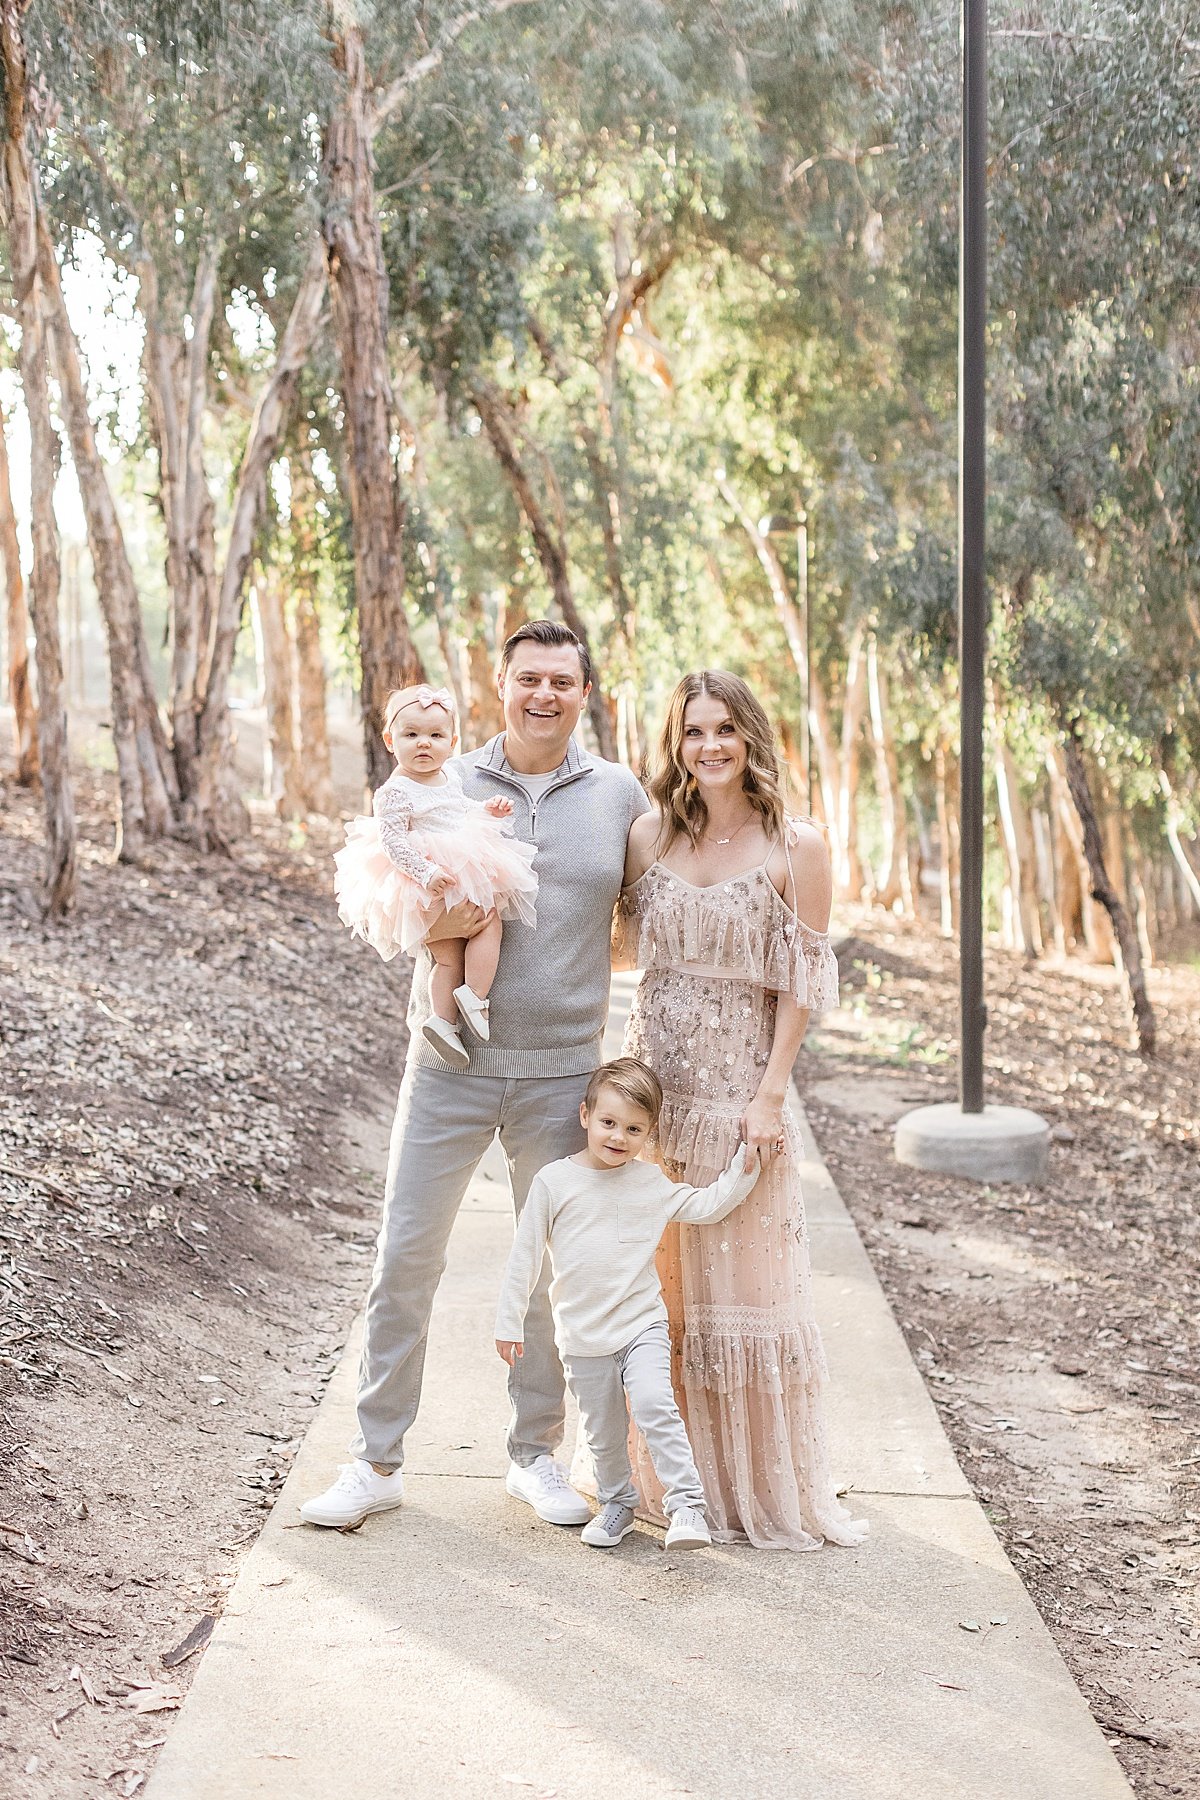 Fall family portrait in california forest photographed by Ambre Williams Photography